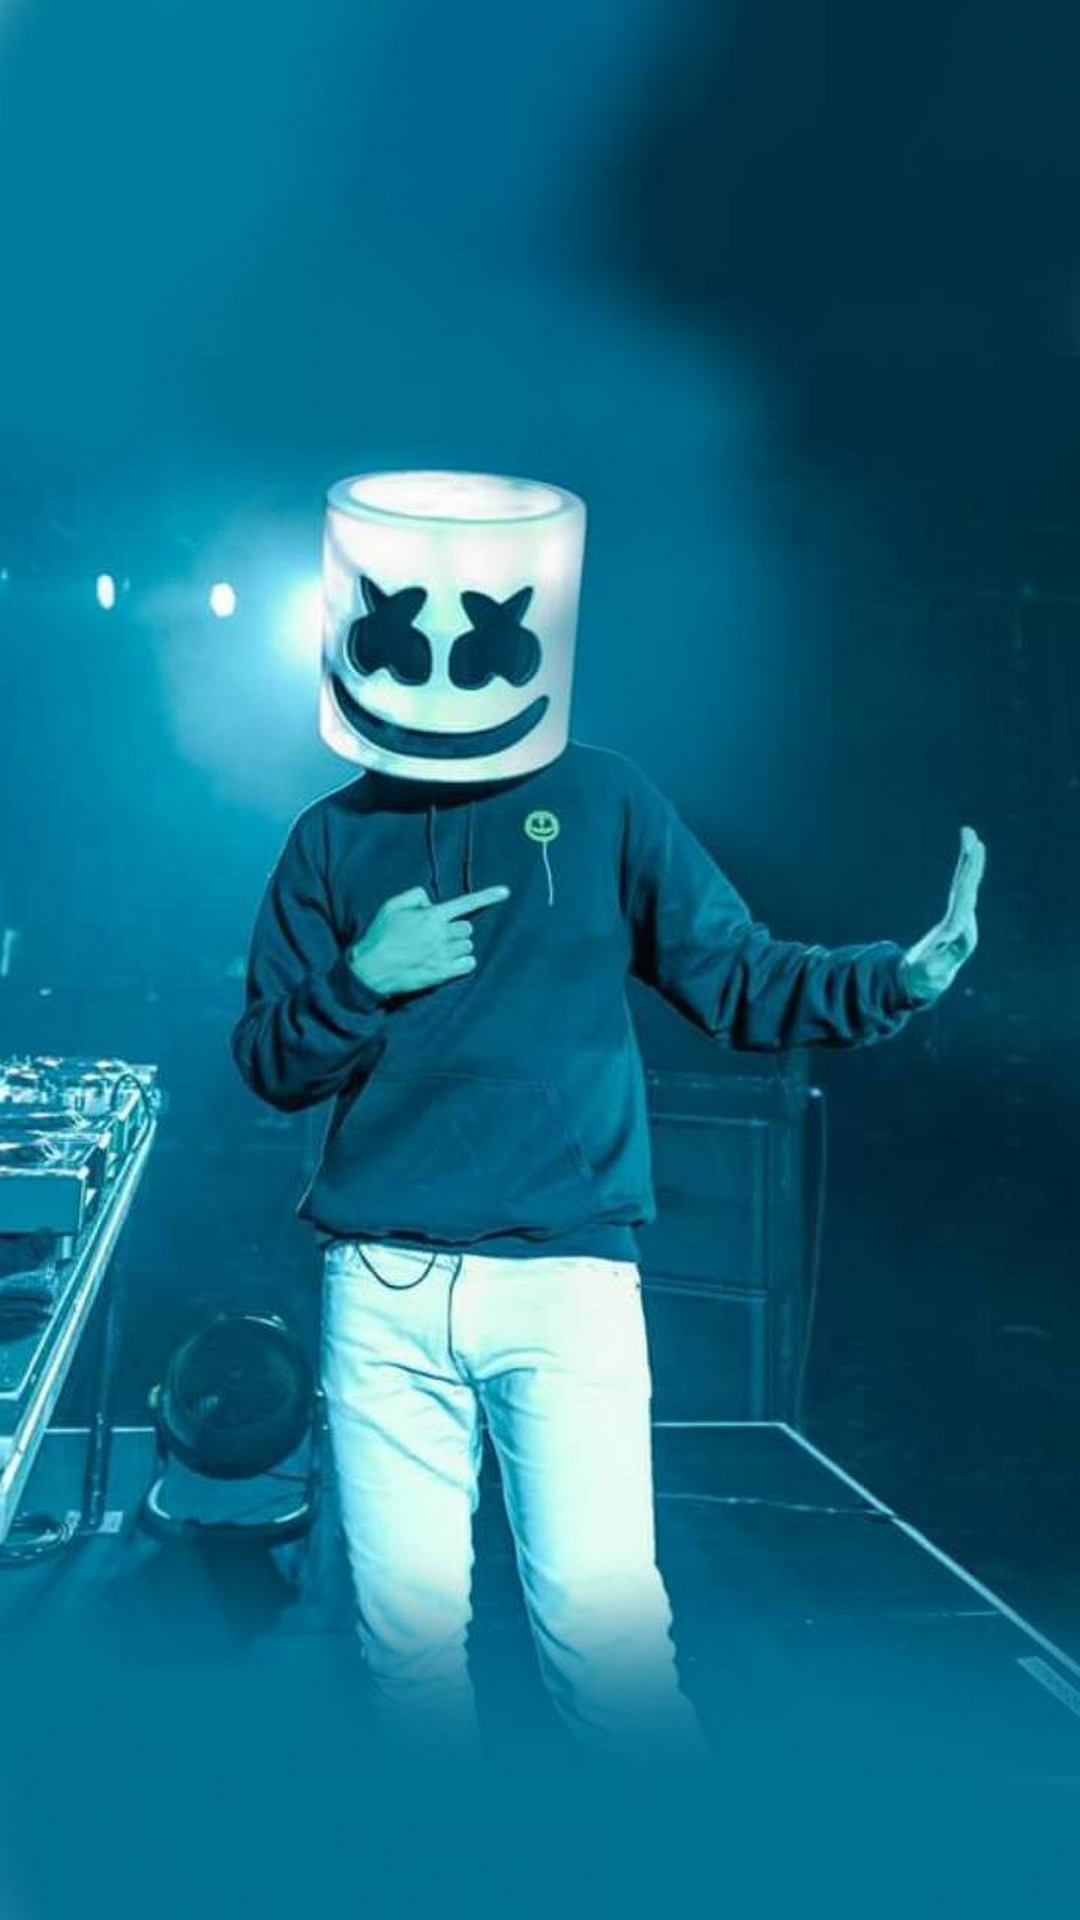 Wallpaper Marshmello for iPhone with high-resolution 1080x1920 pixel. You can use this wallpaper for your iPhone 5, 6, 7, 8, X, XS, XR backgrounds, Mobile Screensaver, or iPad Lock Screen